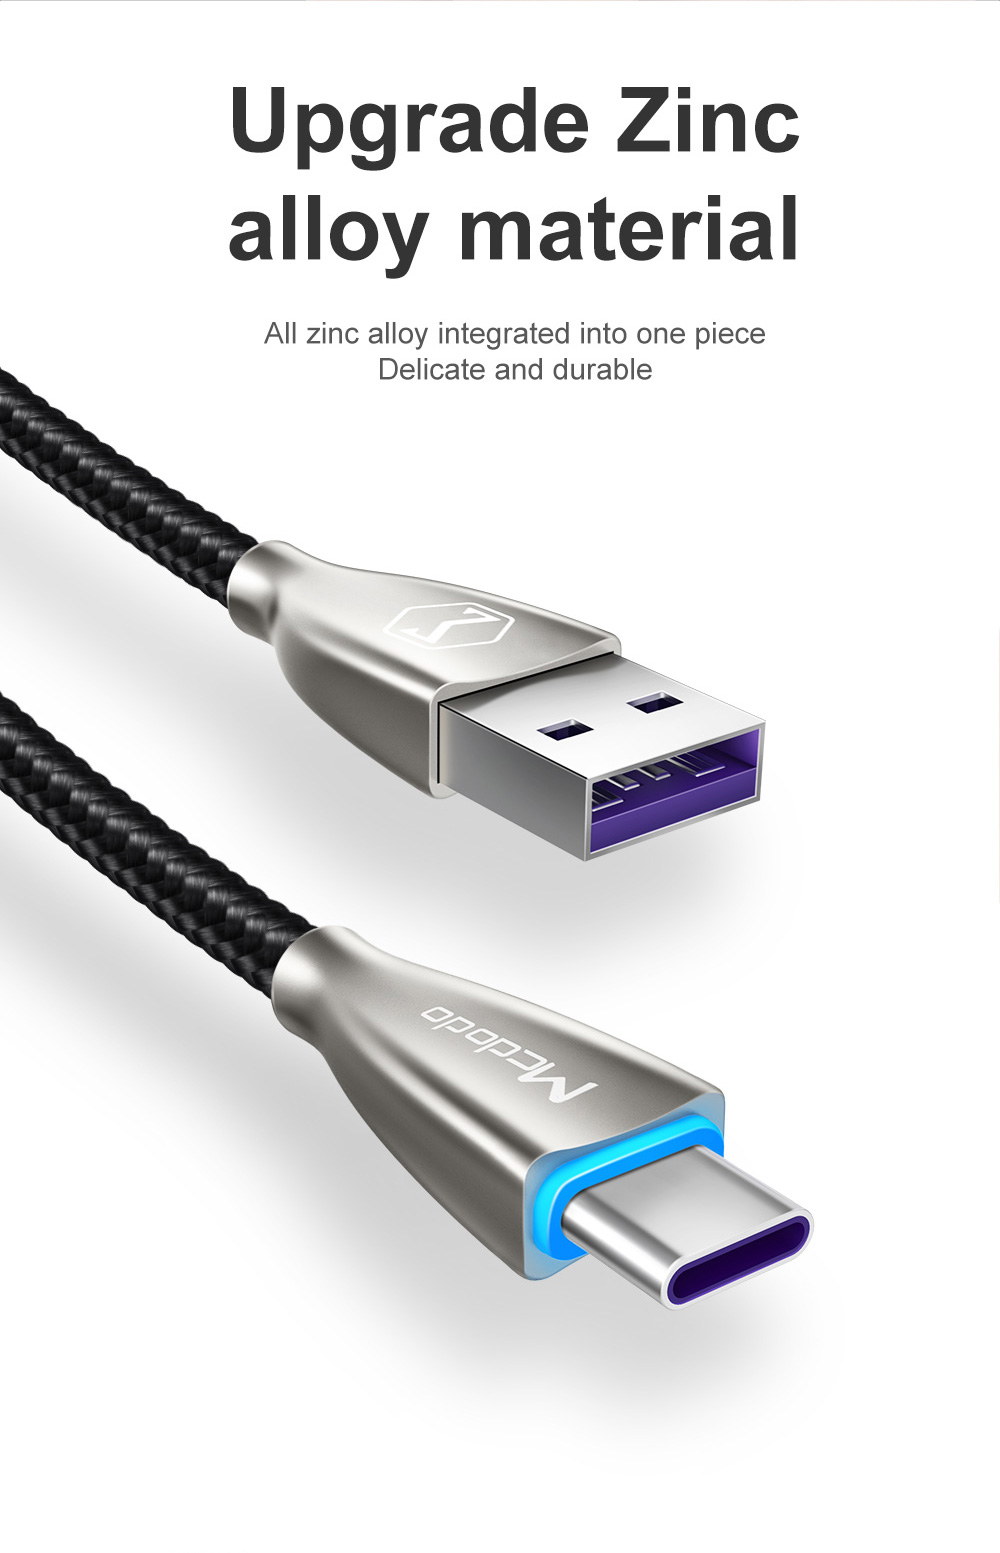 Mcdodo 5A Type C Braided Fast Charging Data Cable 1M For Huawei Super Charge Mate 10 Pro P20